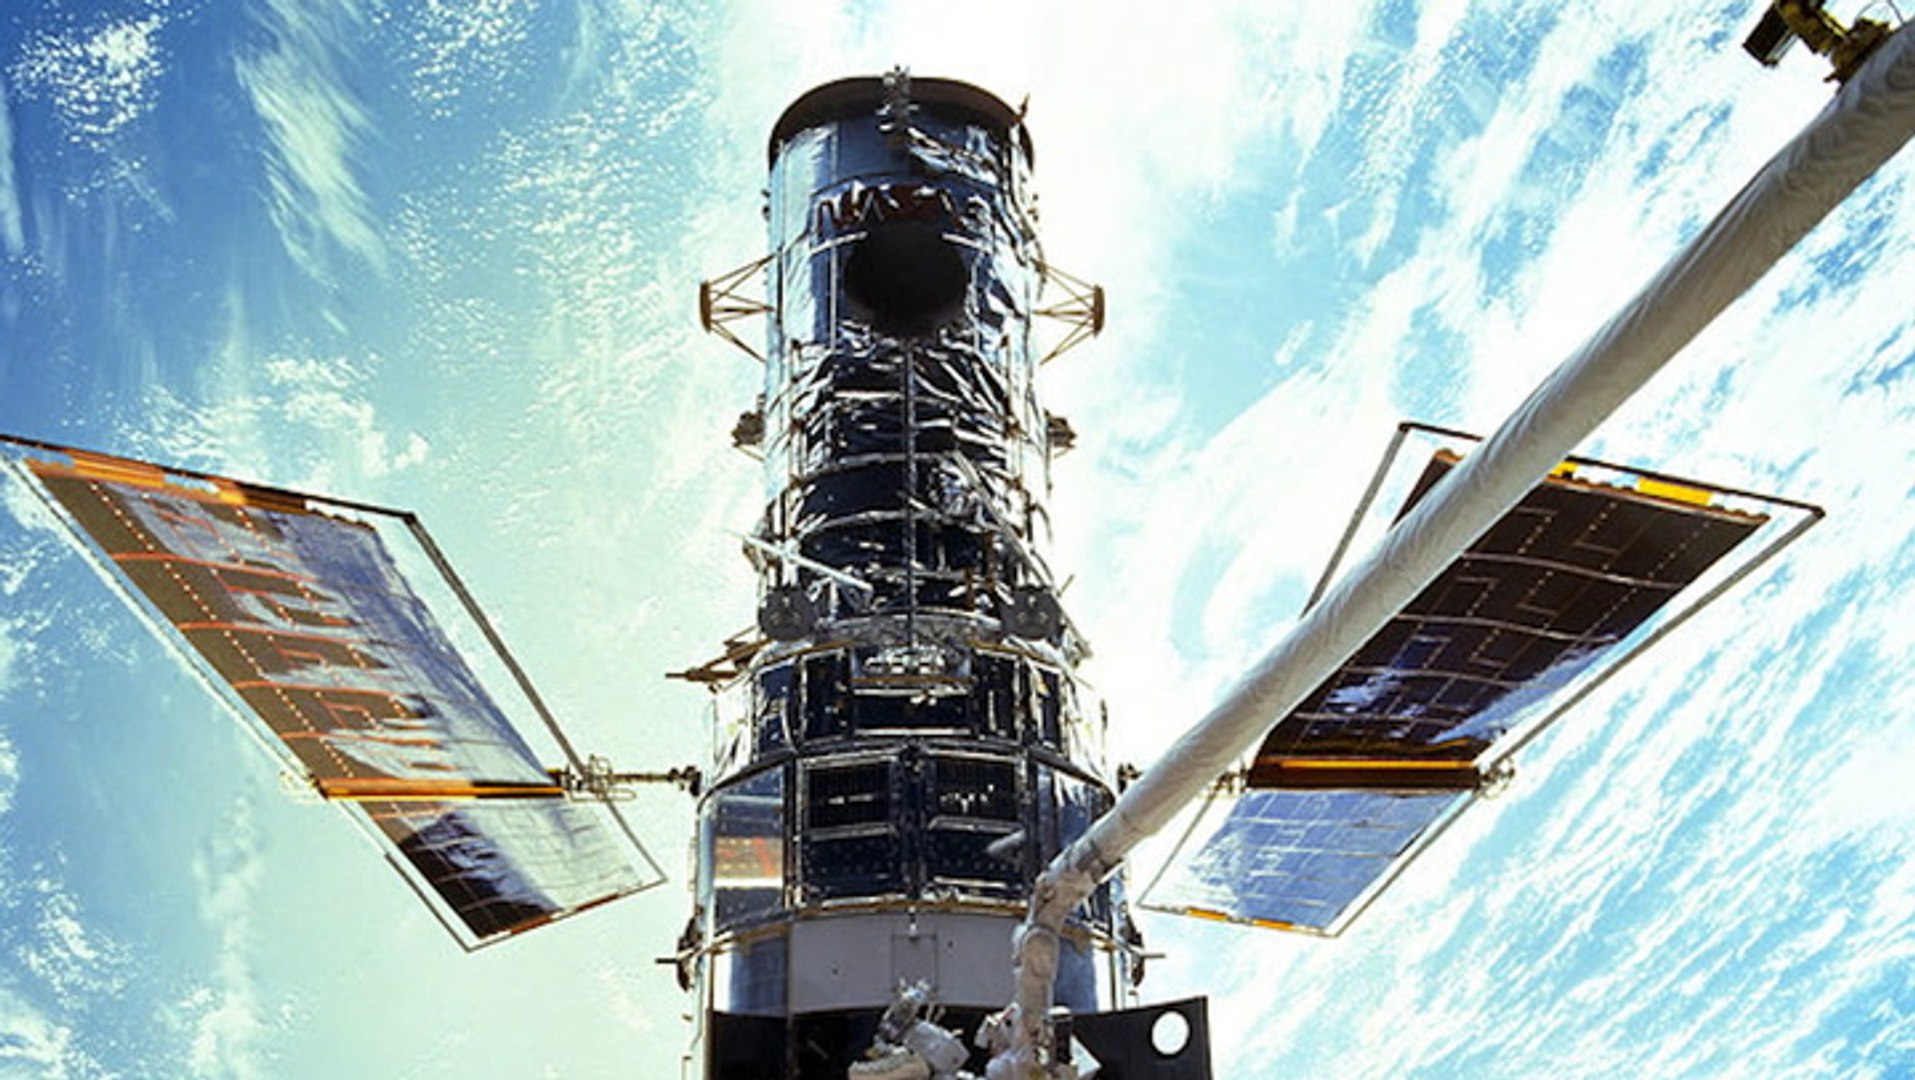 Celebrating 30 years of Hubble space exploration